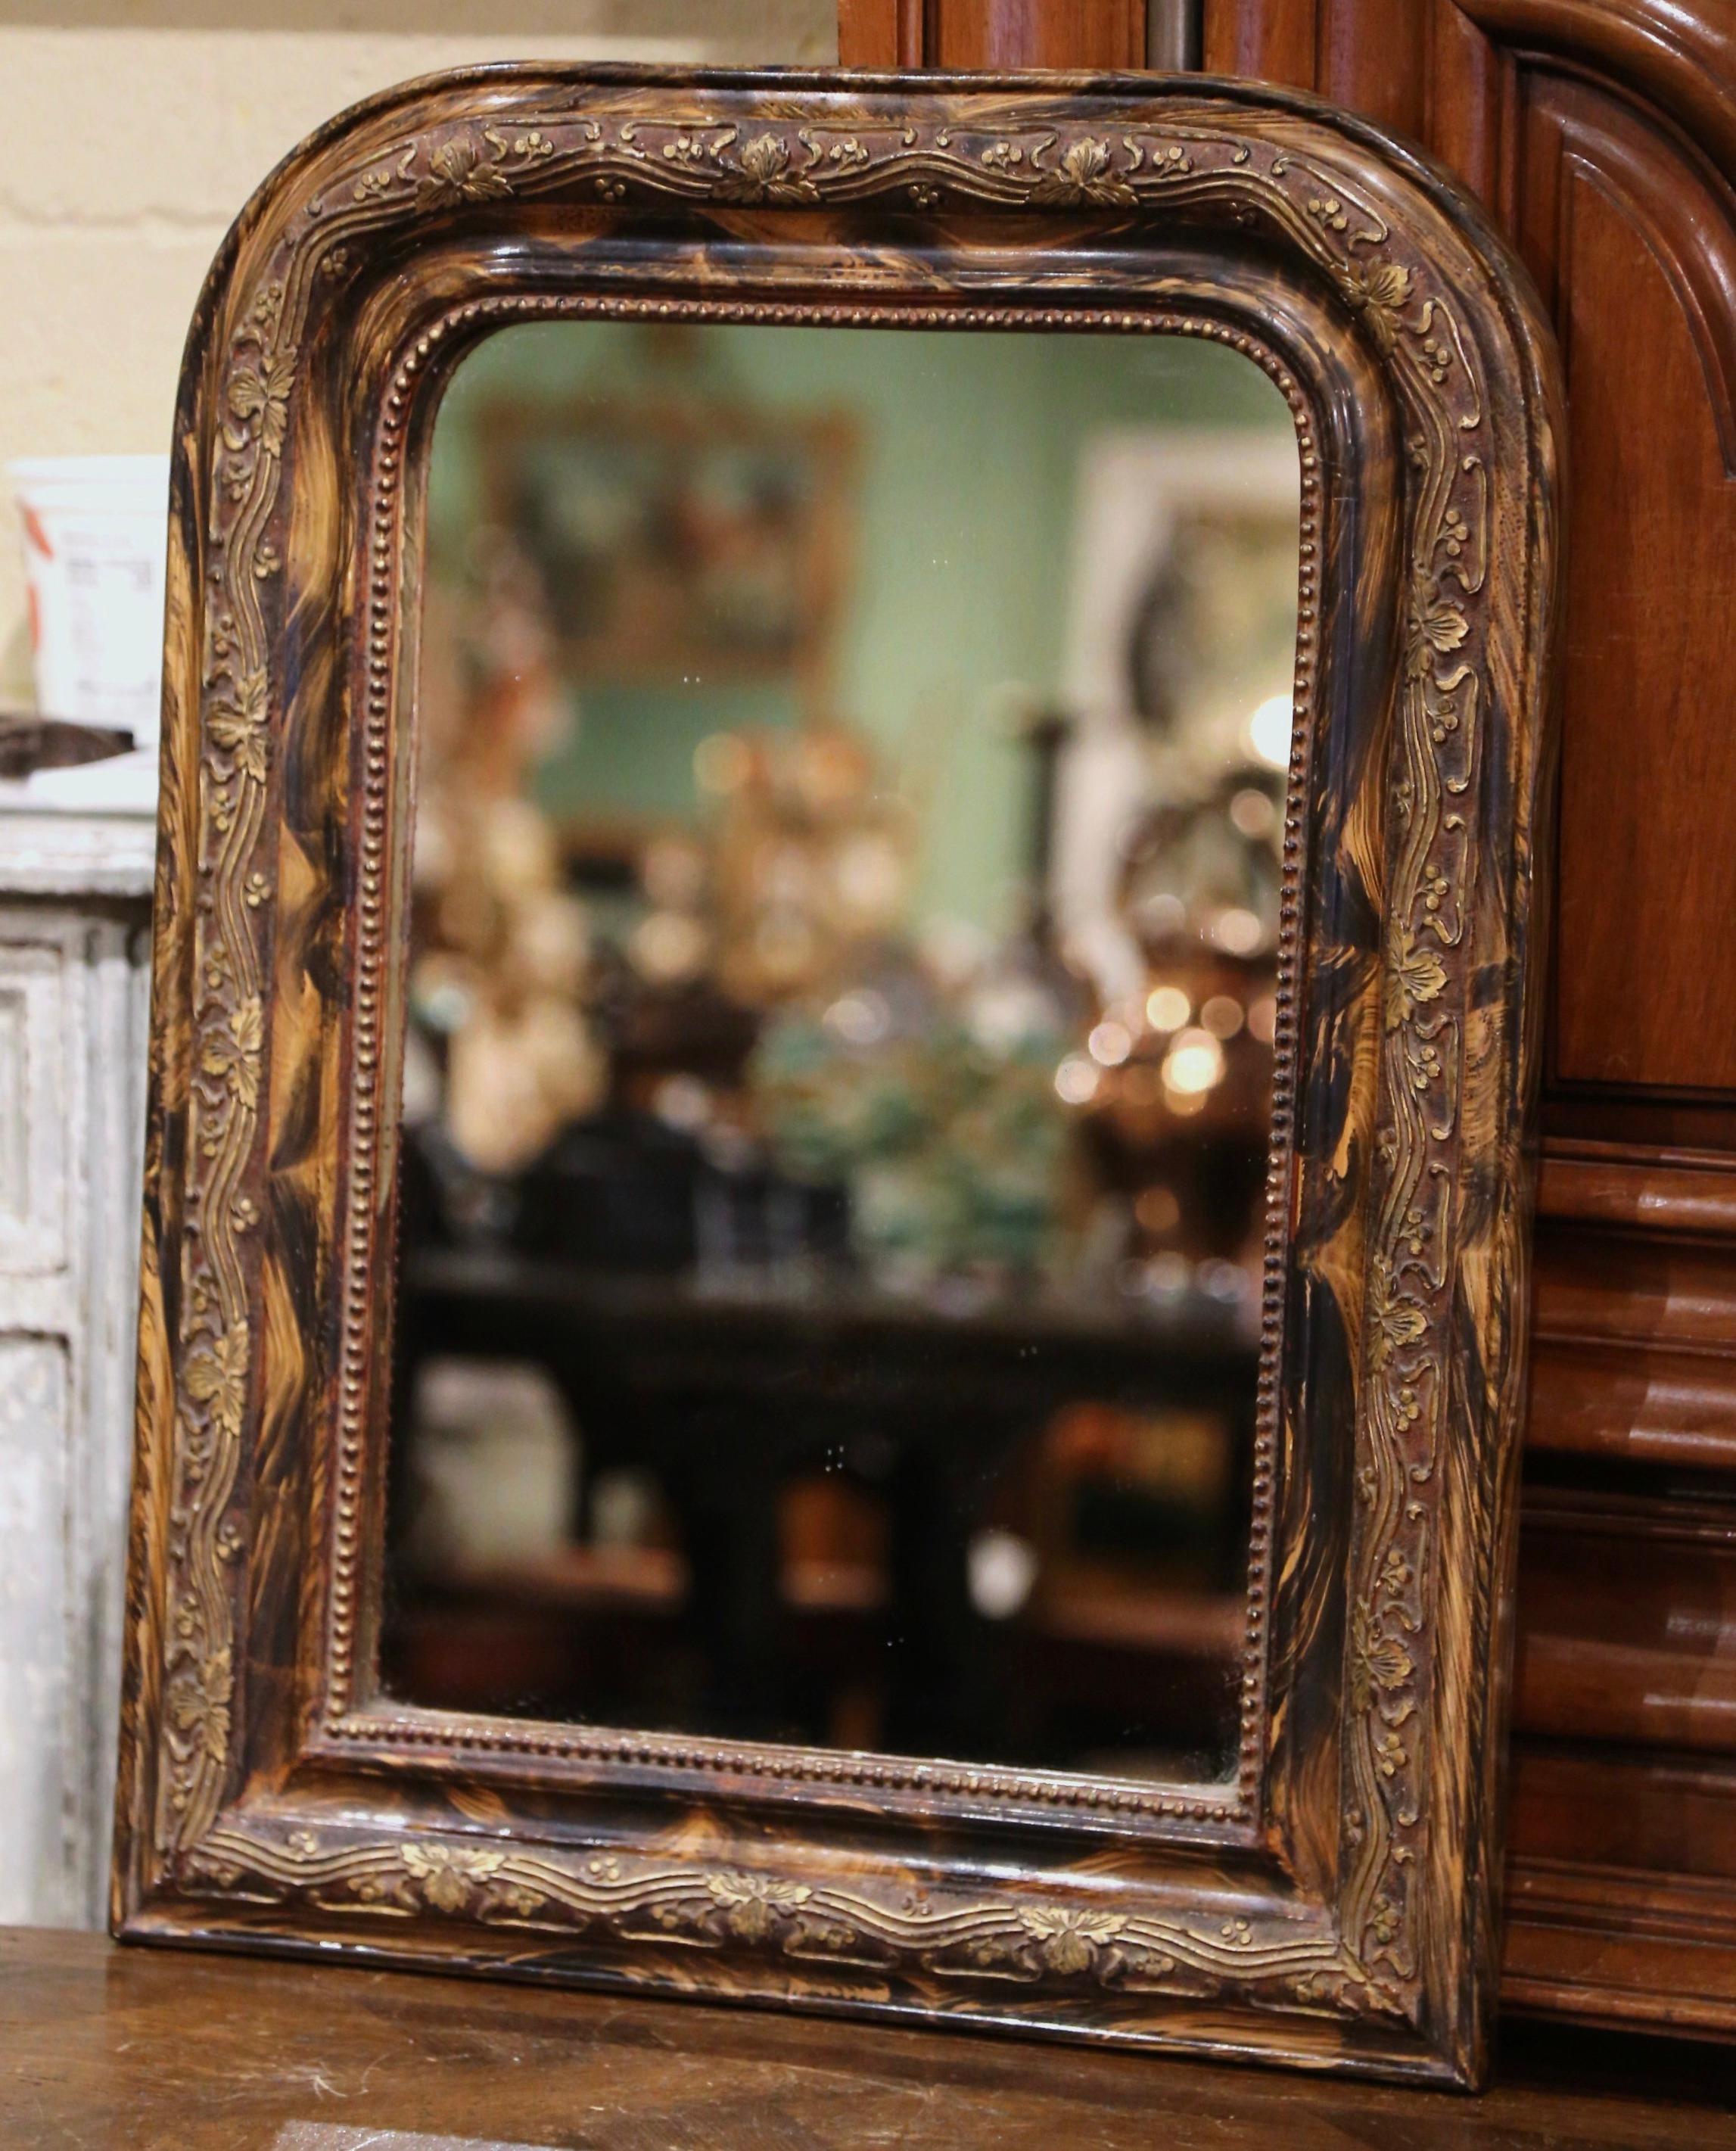 This elegant antique wall mirror was crafted in France, circa 1880. The frame with rounded corners is decorated with gilt vine motifs in high relief in between faux burl wood painted decor; it is further embellished with beads decor around the